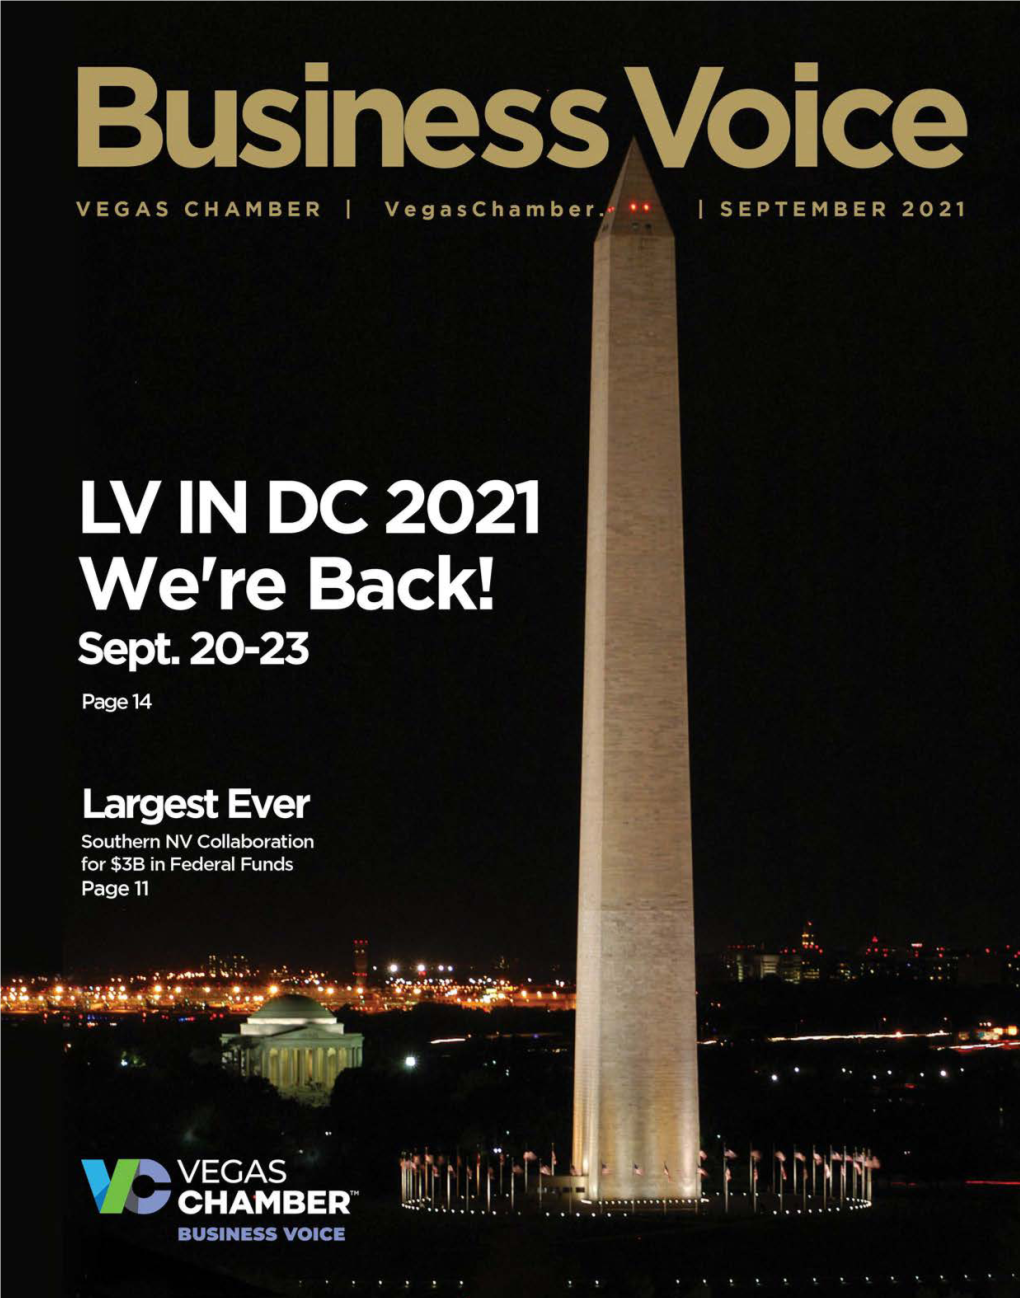 Vegas Chamber September 2021 Business Voice 1 Are You the Business of the Year?